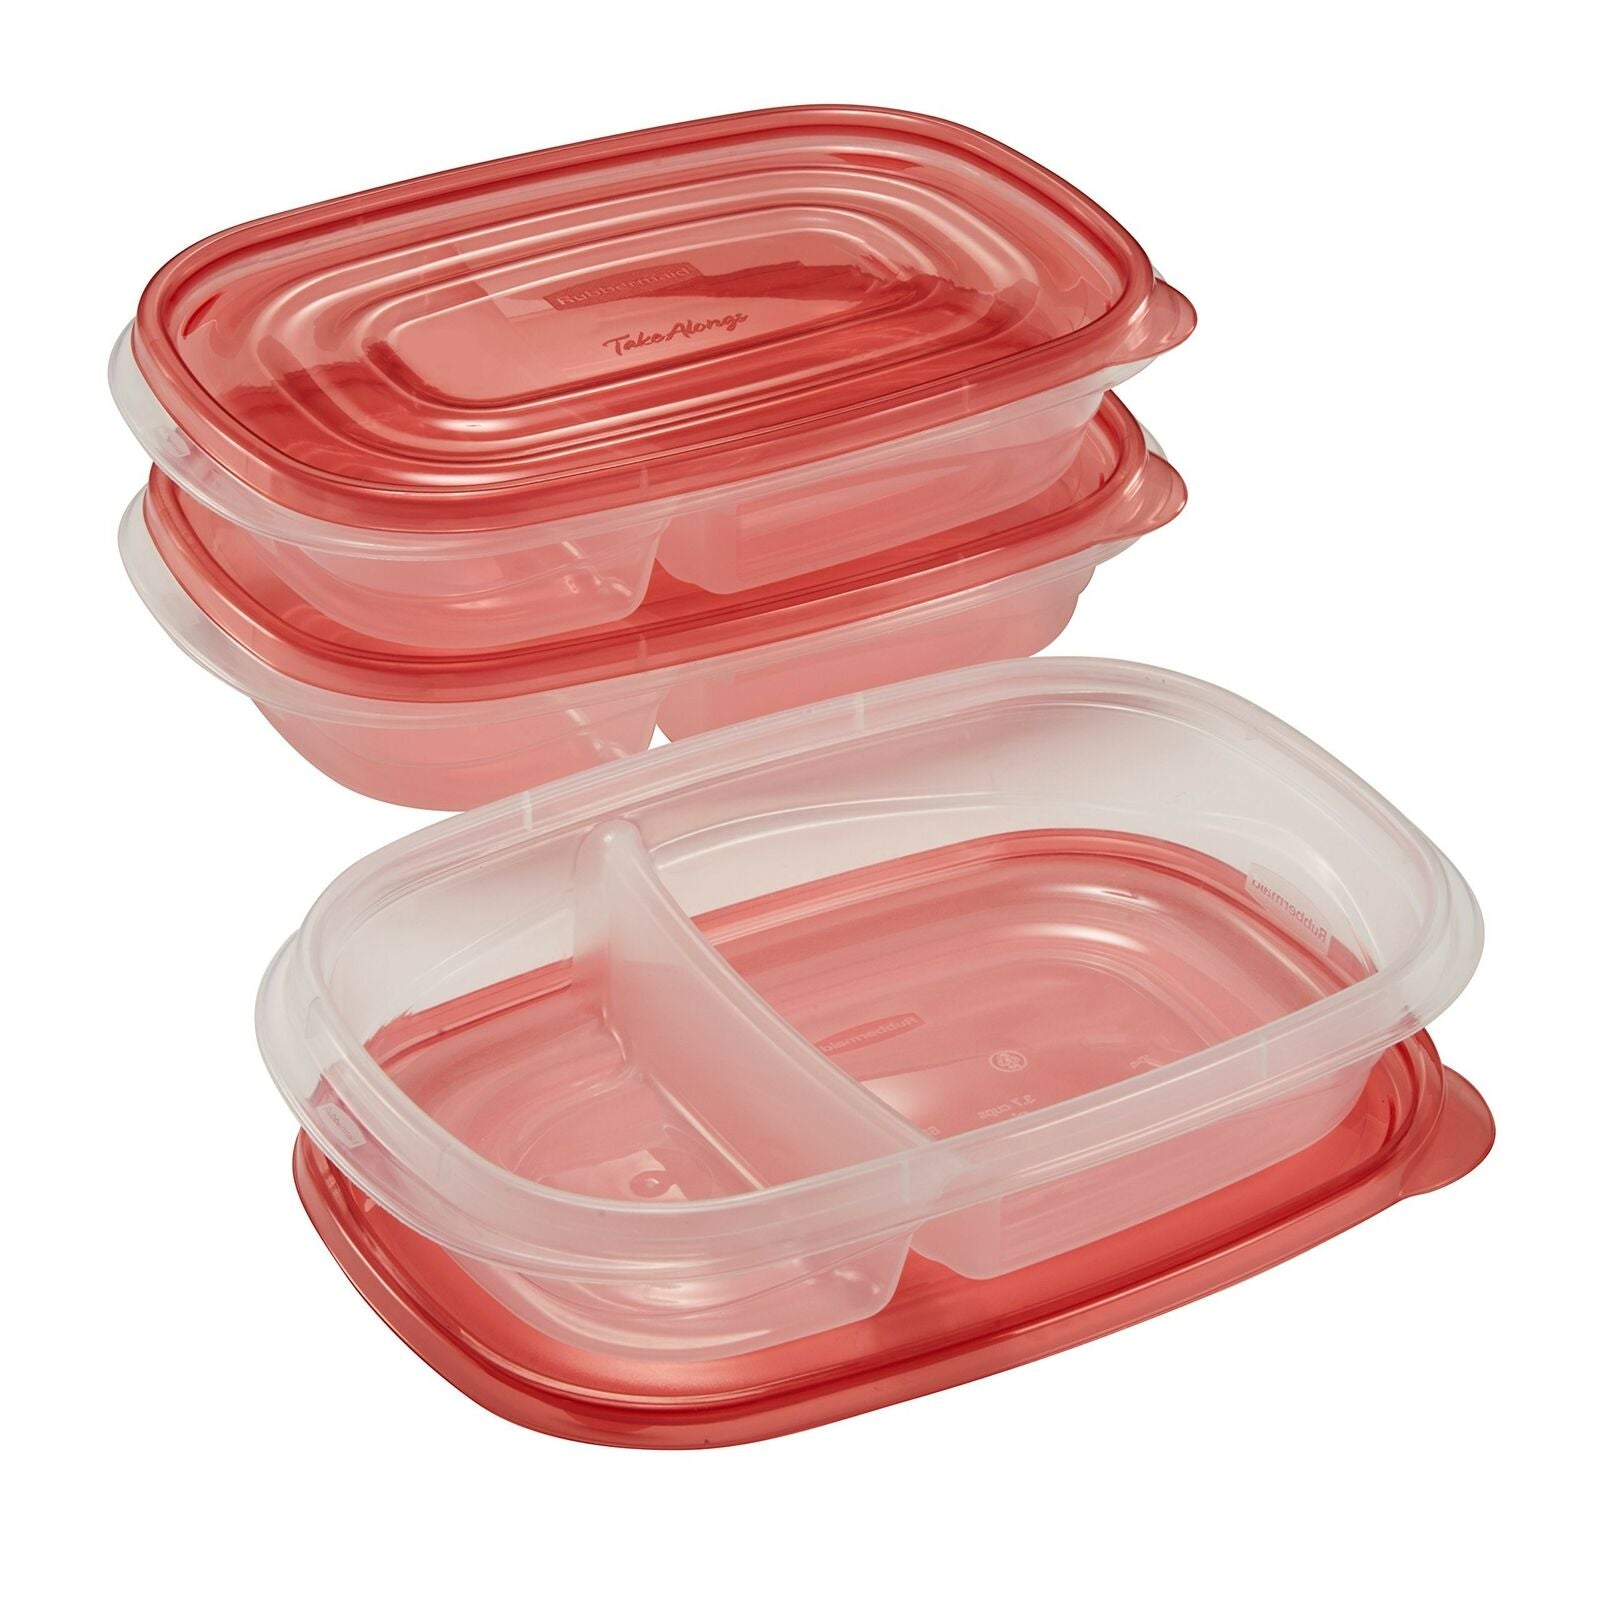 Rubbermaid TakeAlongs Divided Rectangular Food Storage Containers, 3.7 Cup (Pack of 3)